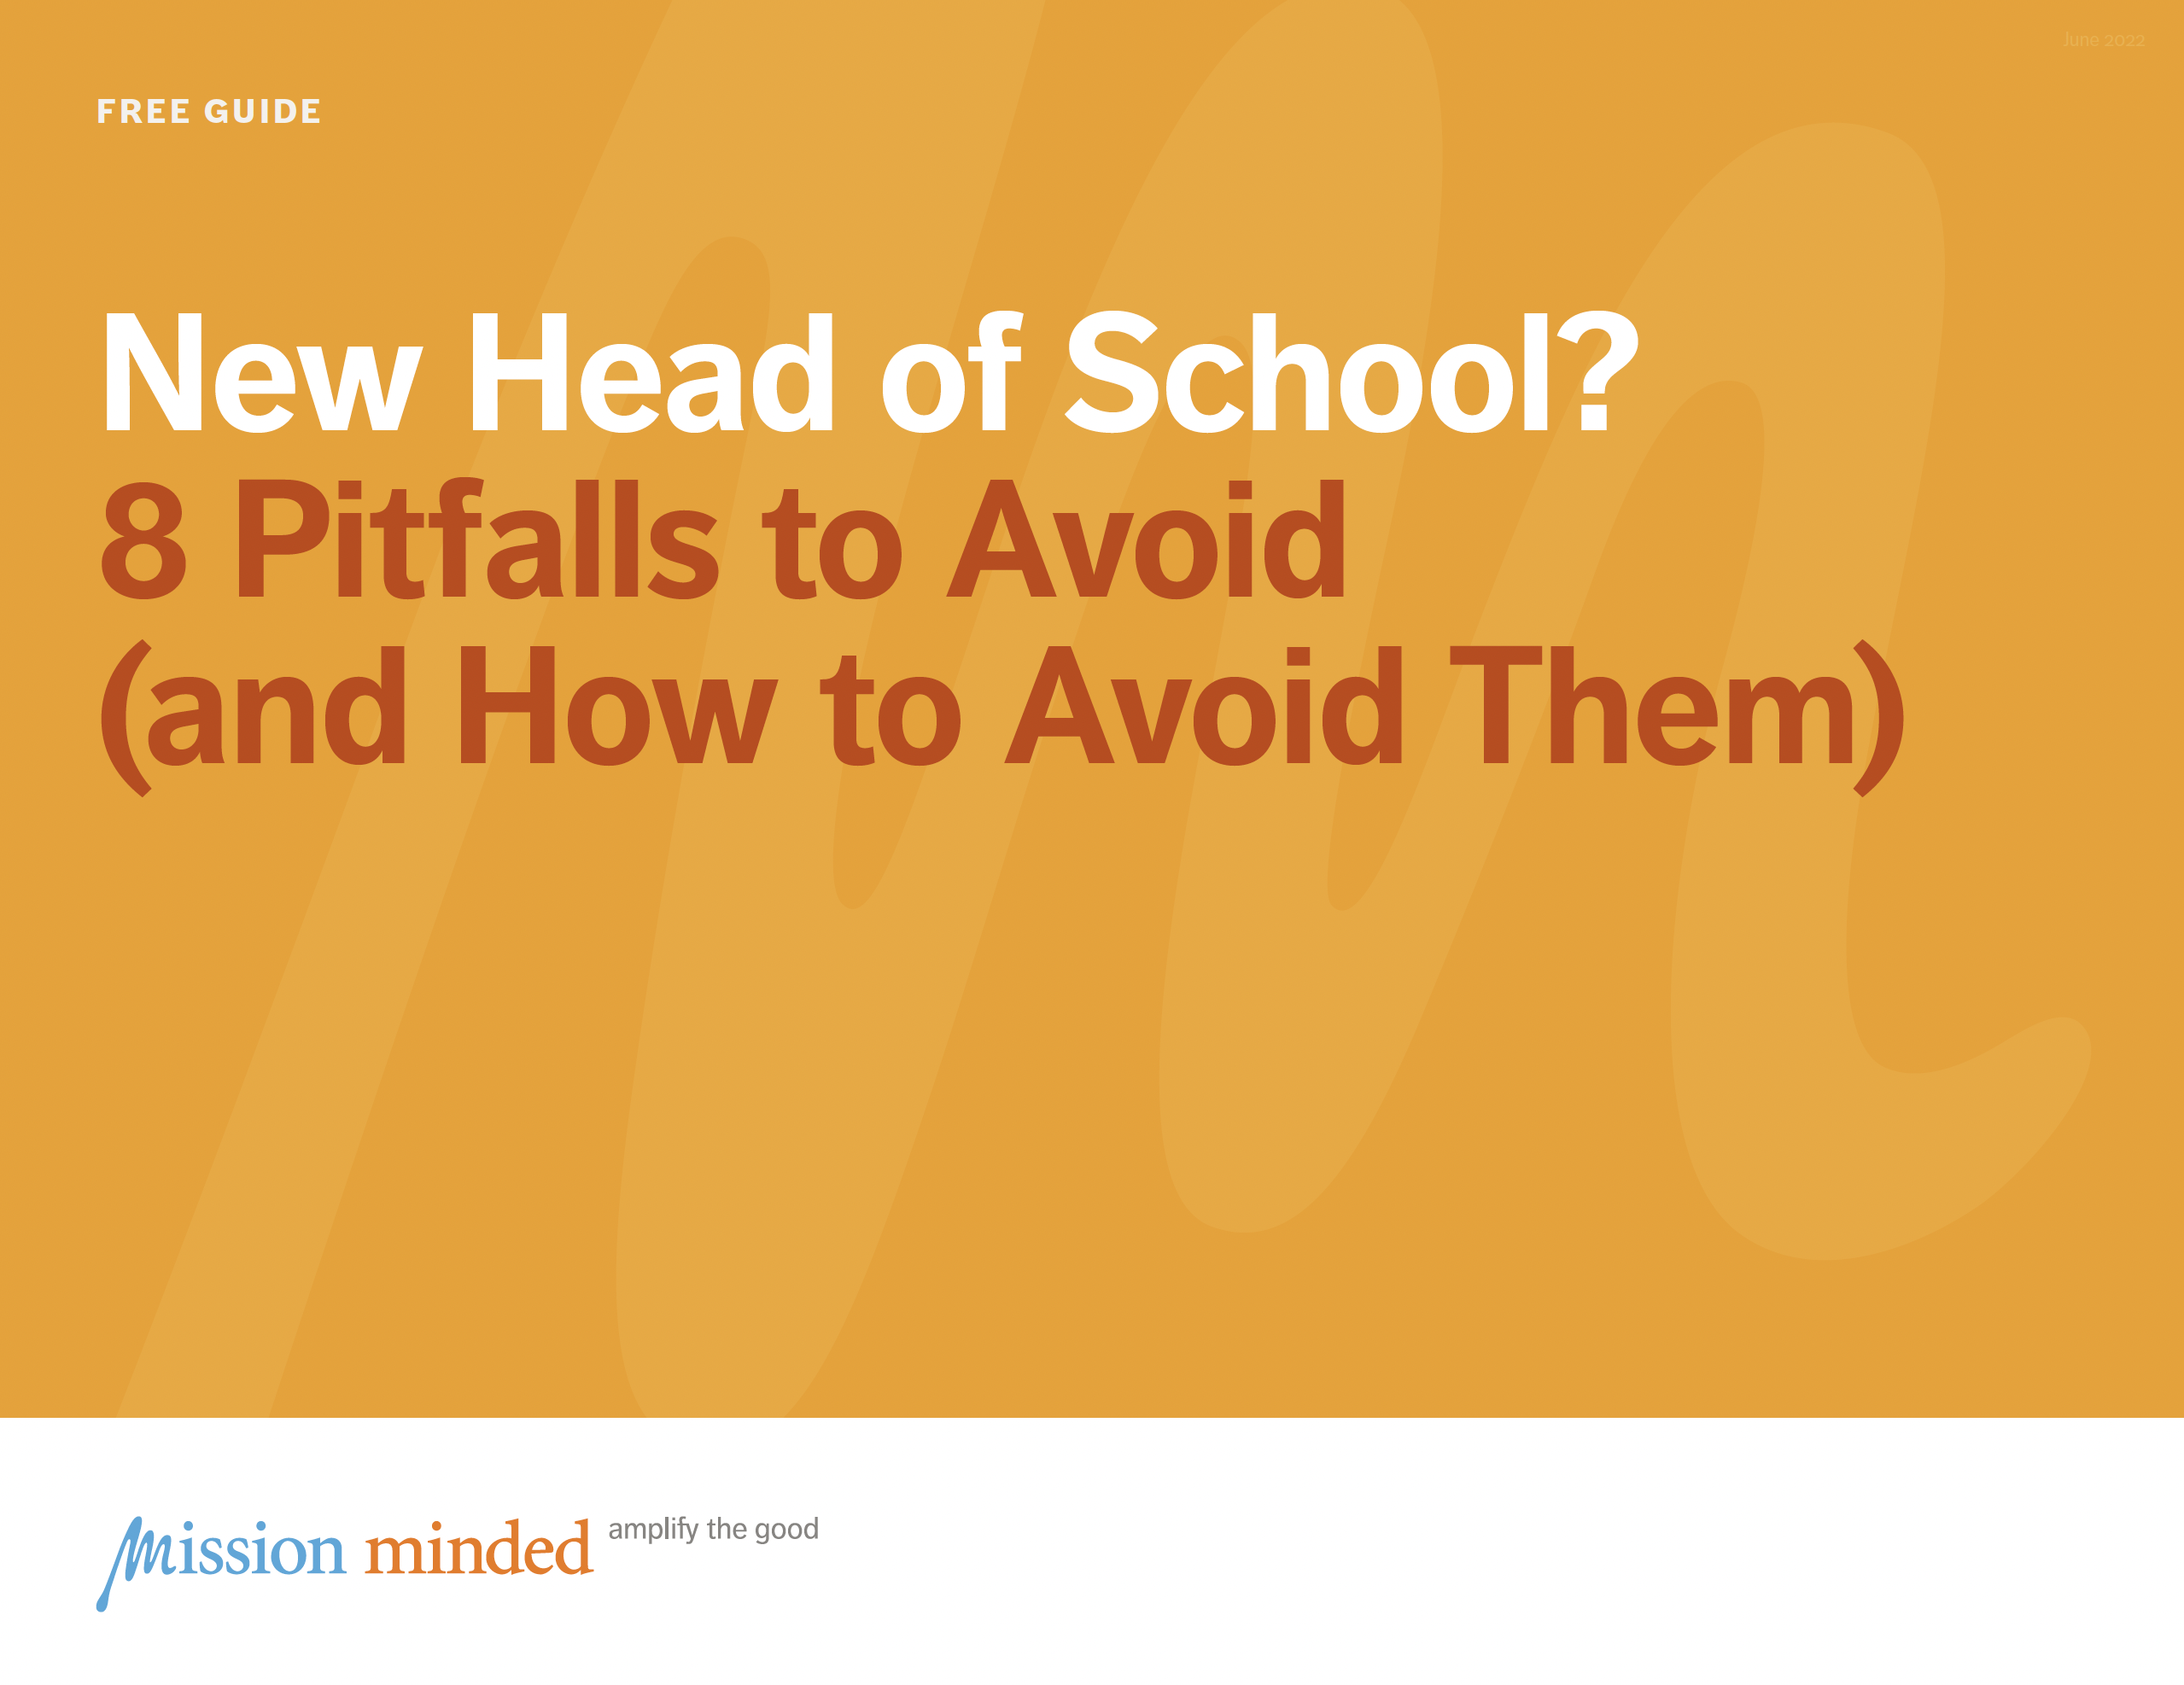 New Head of School? | 8 Pitfalls to Avoid (and How to Avoid Them)